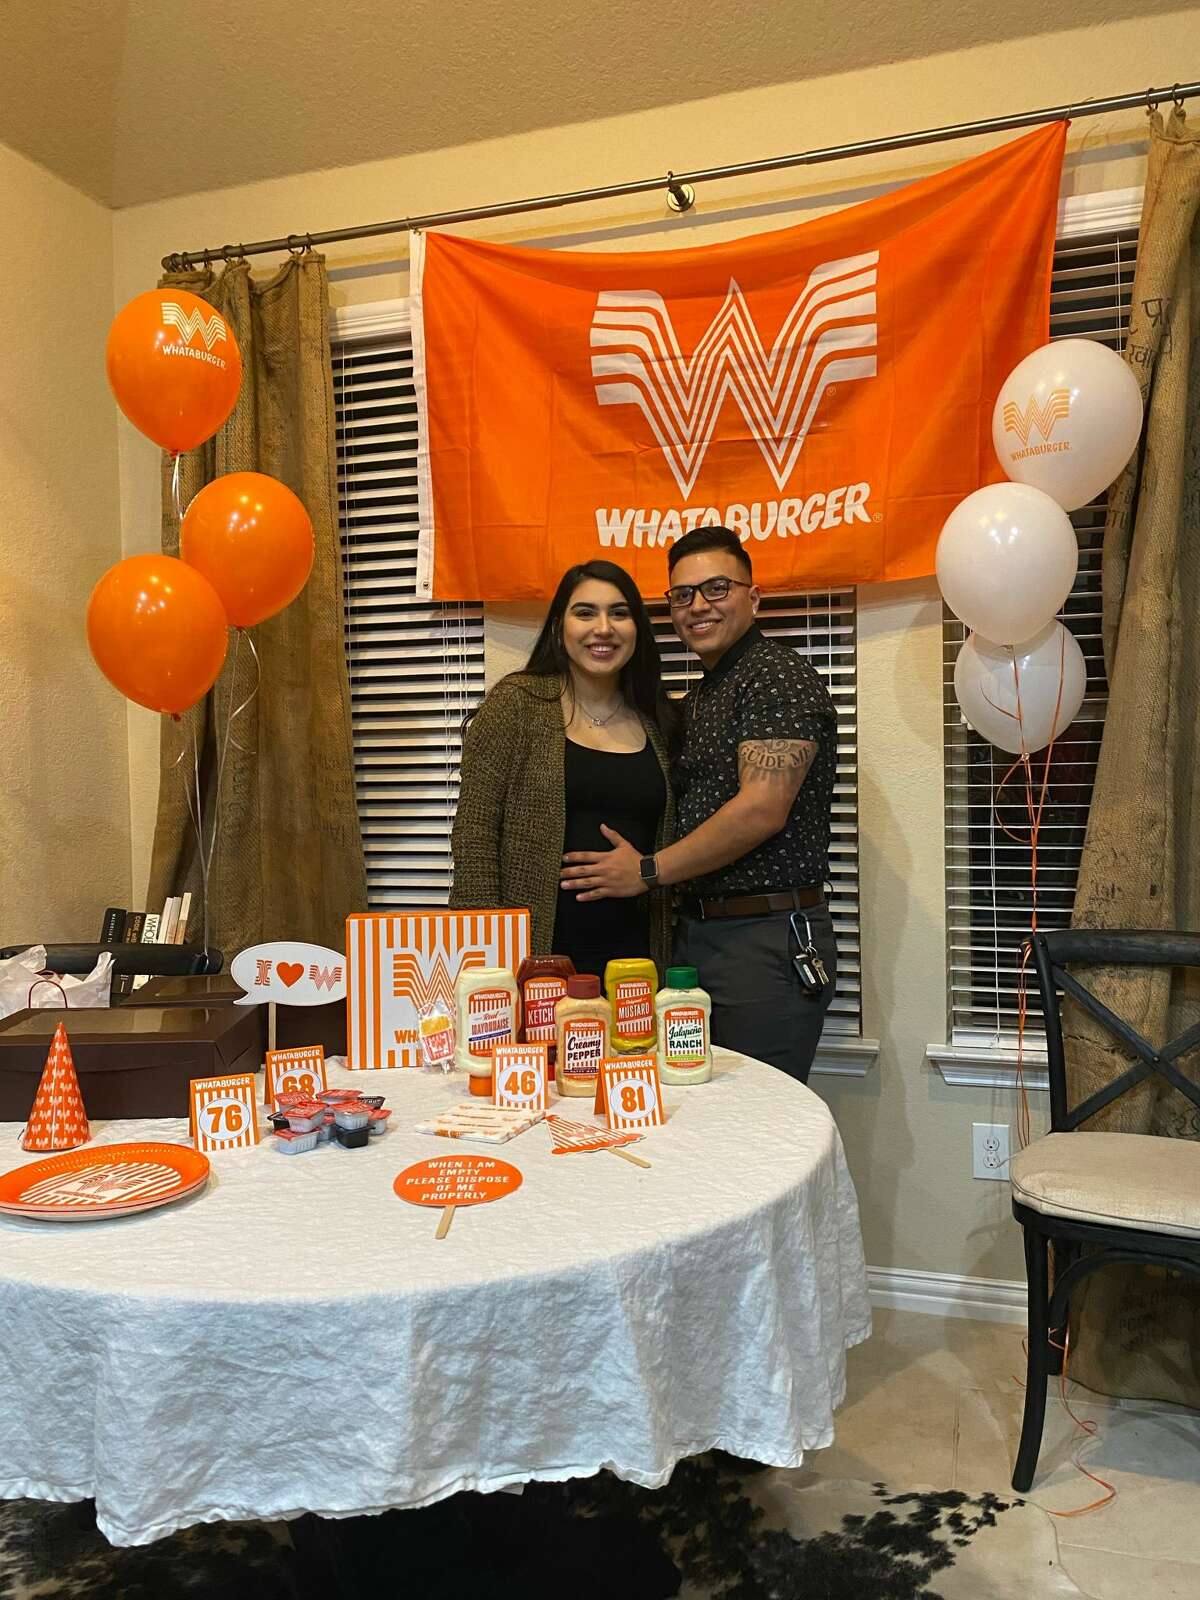 San Antonio couple Izzy Castro and Daniel Castilleja decided to throw a gender reveal party around what their baby loves to eat: Whataburger.